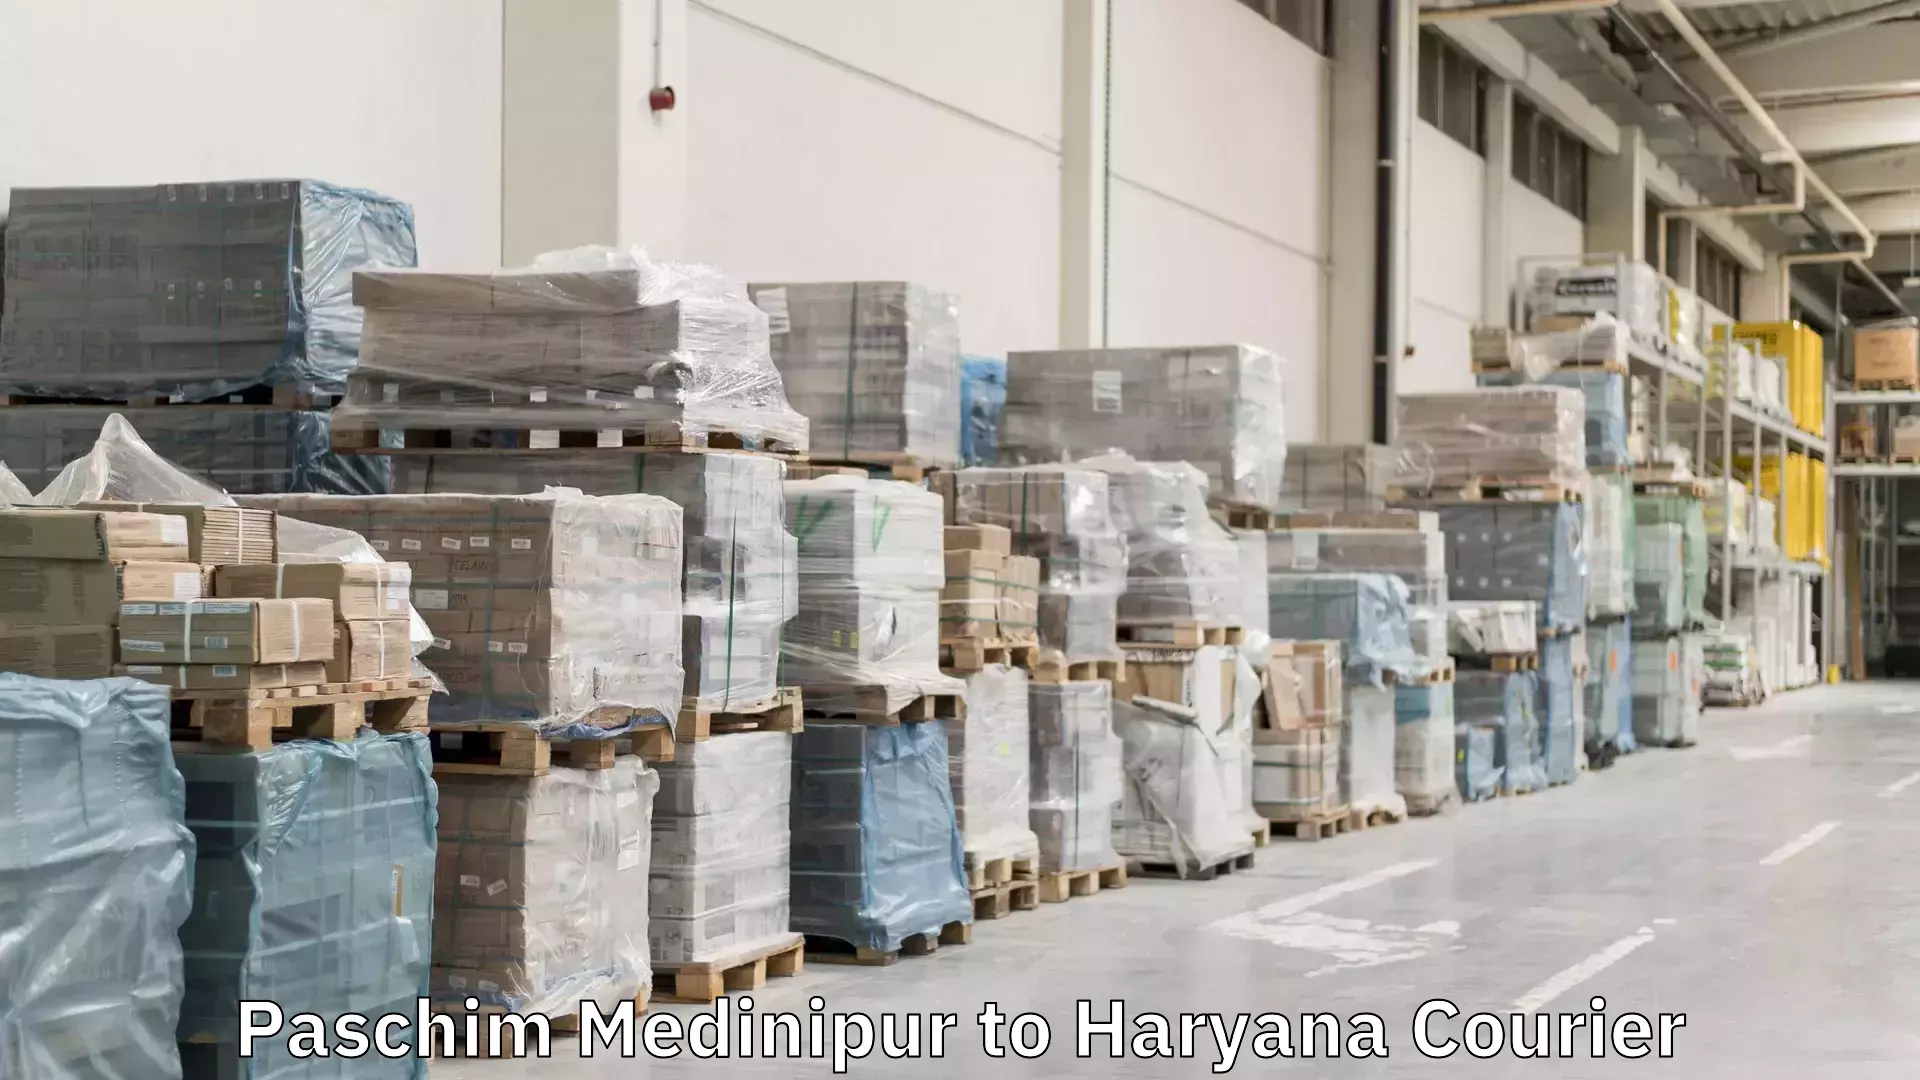 Express delivery capabilities in Paschim Medinipur to Haryana